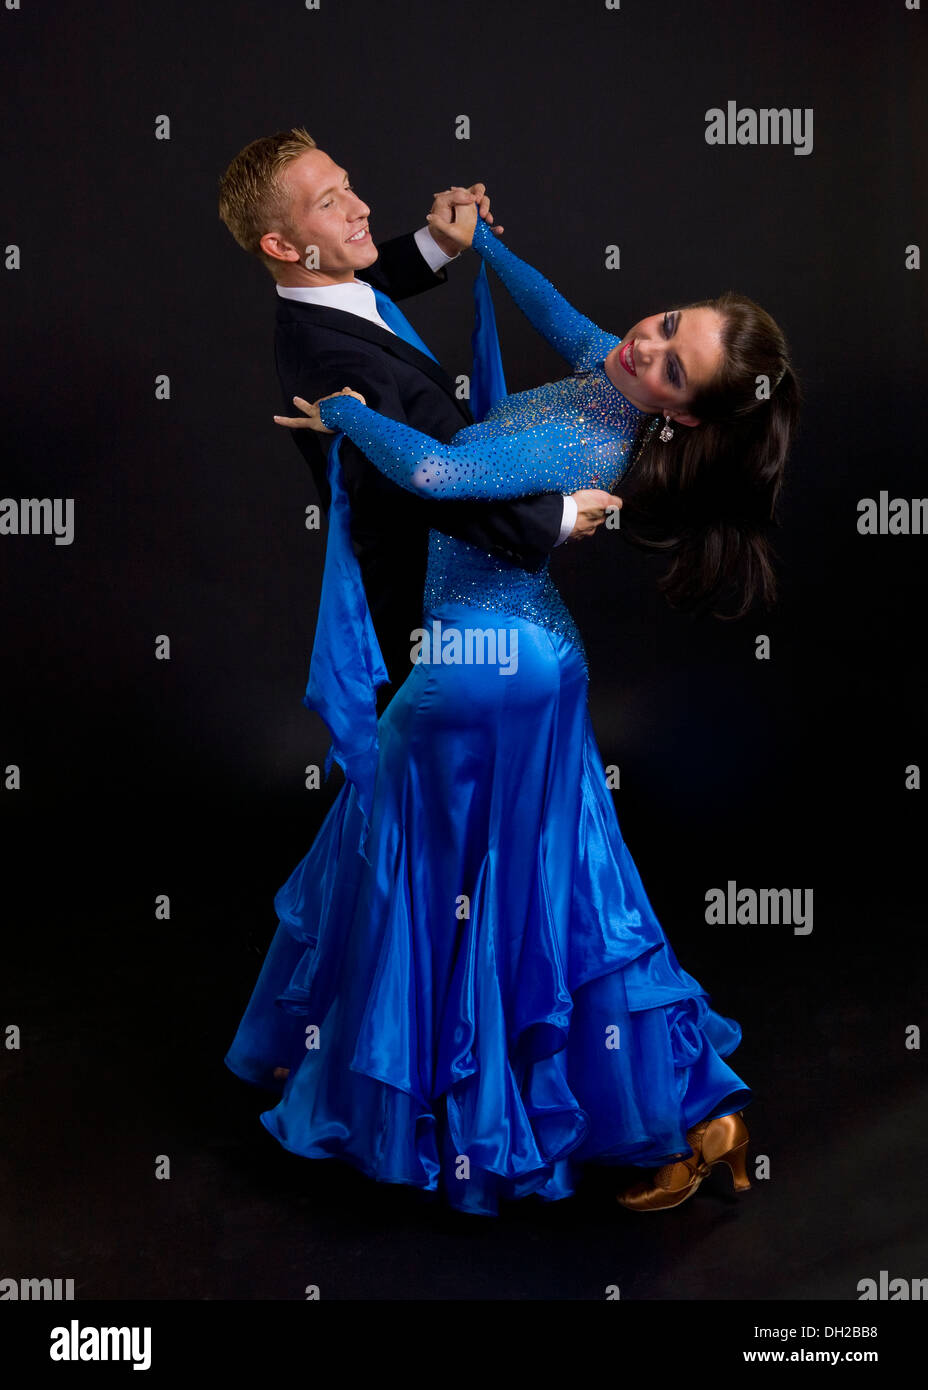 Young ballroom dancers in formal costumes posing against a solid ...